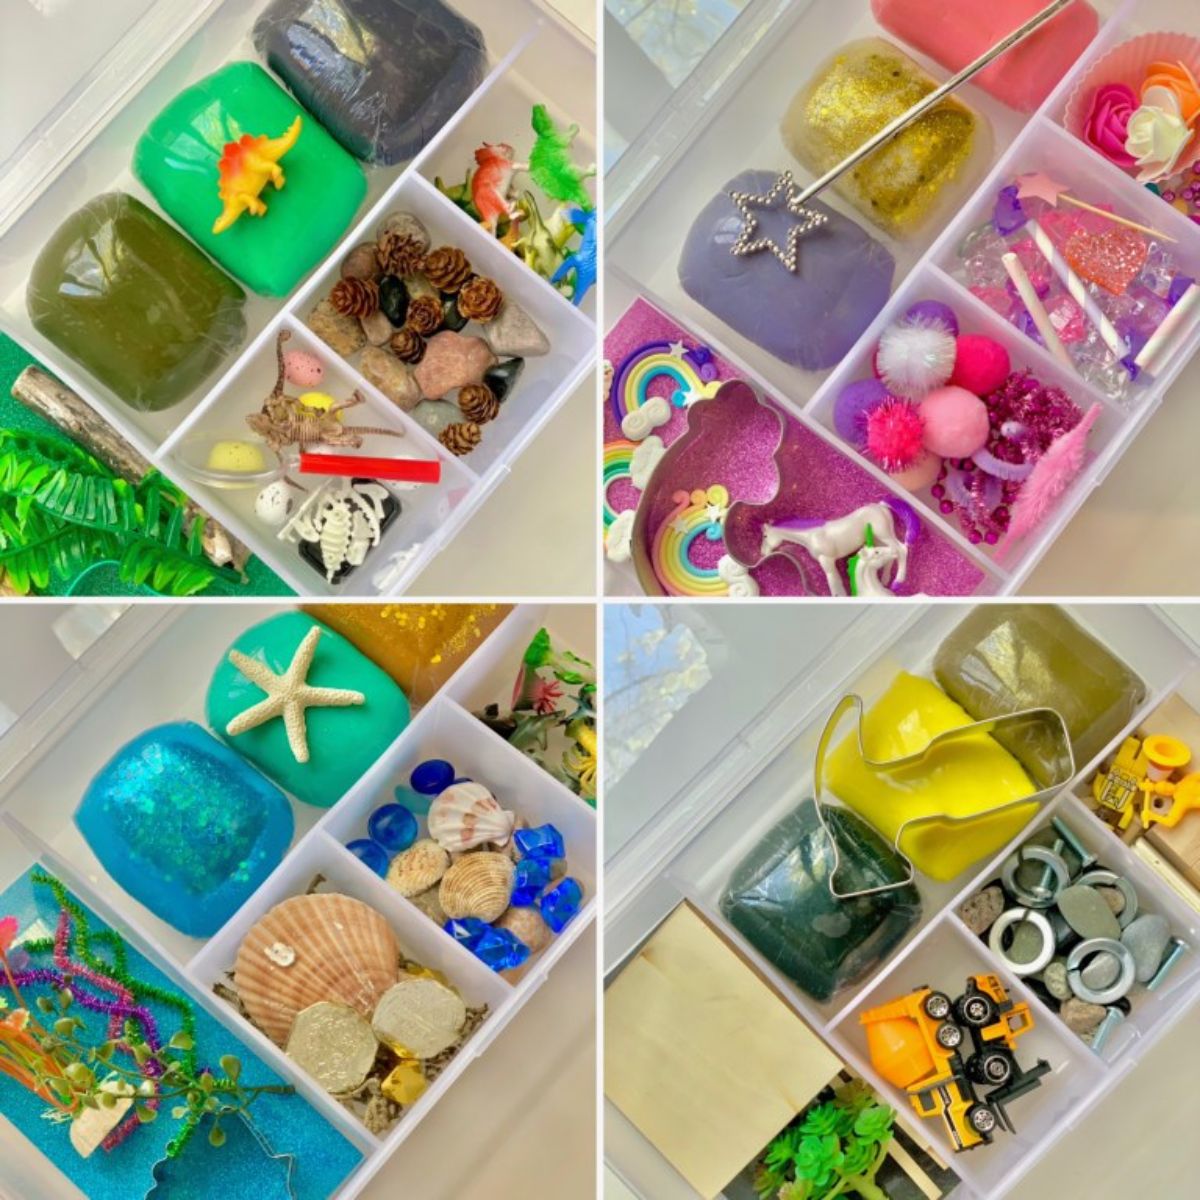 4 images of storage boxes full of tiny toys and items